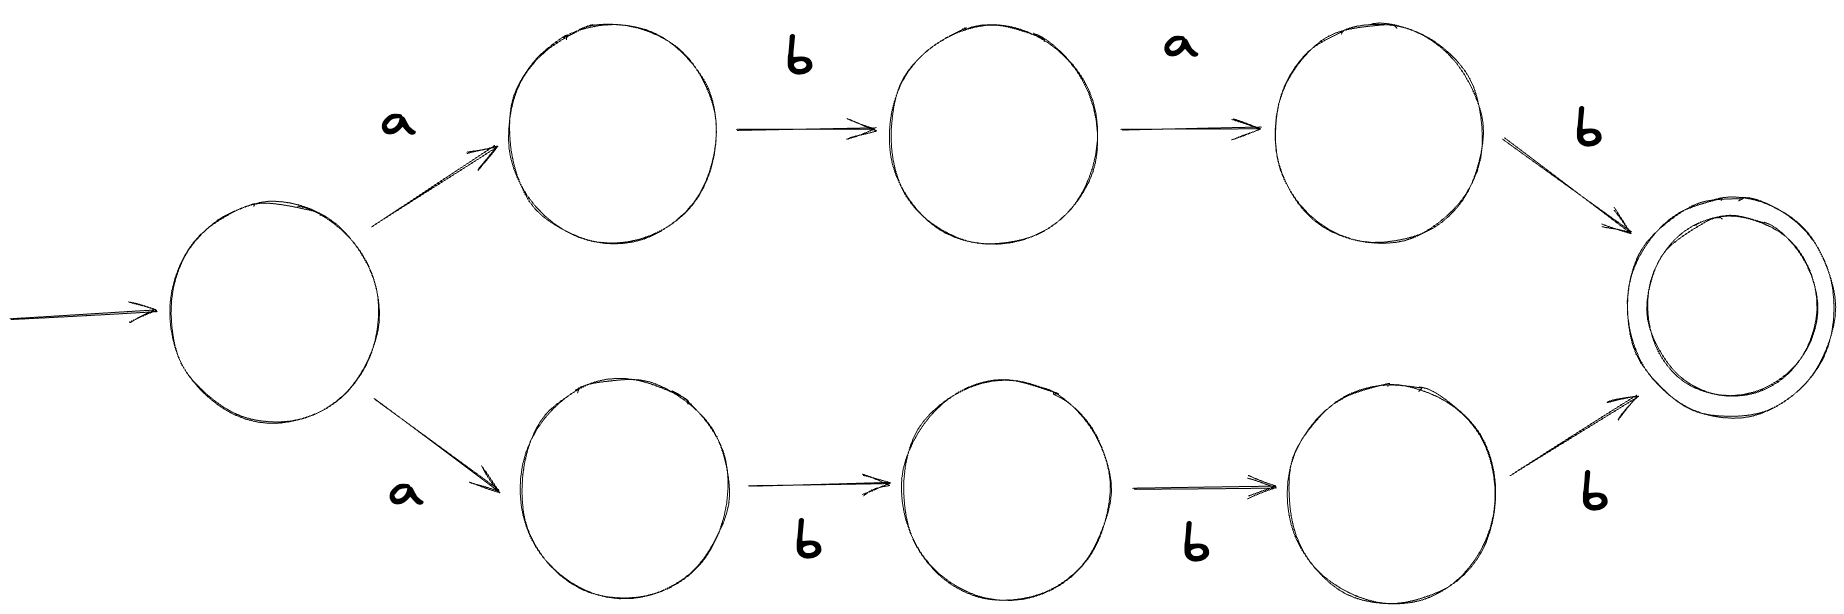 A diagram of a NFA for the regex abab|abbb